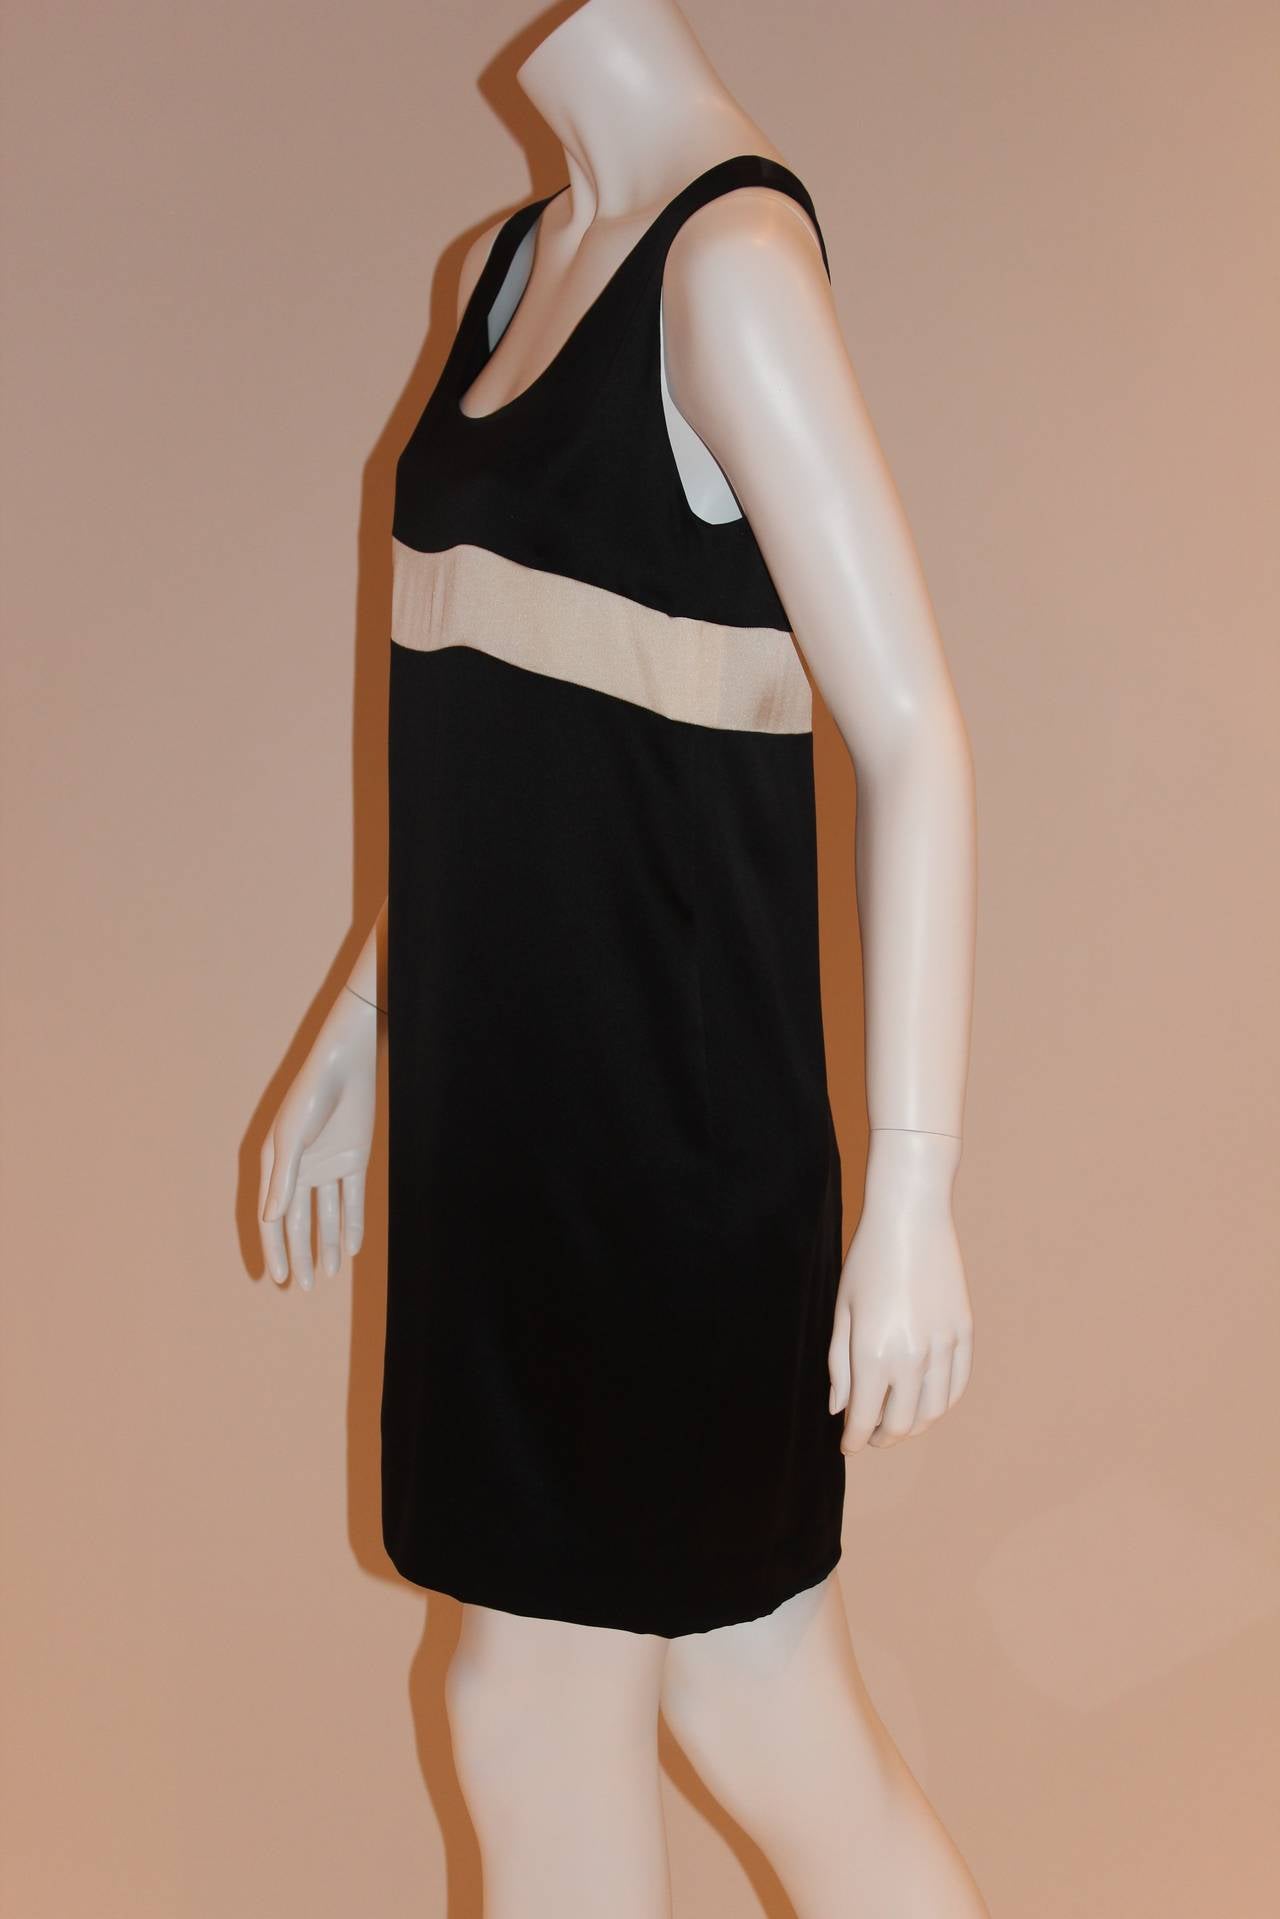 1998 Chanel Black and White Dress In Excellent Condition In New York, NY